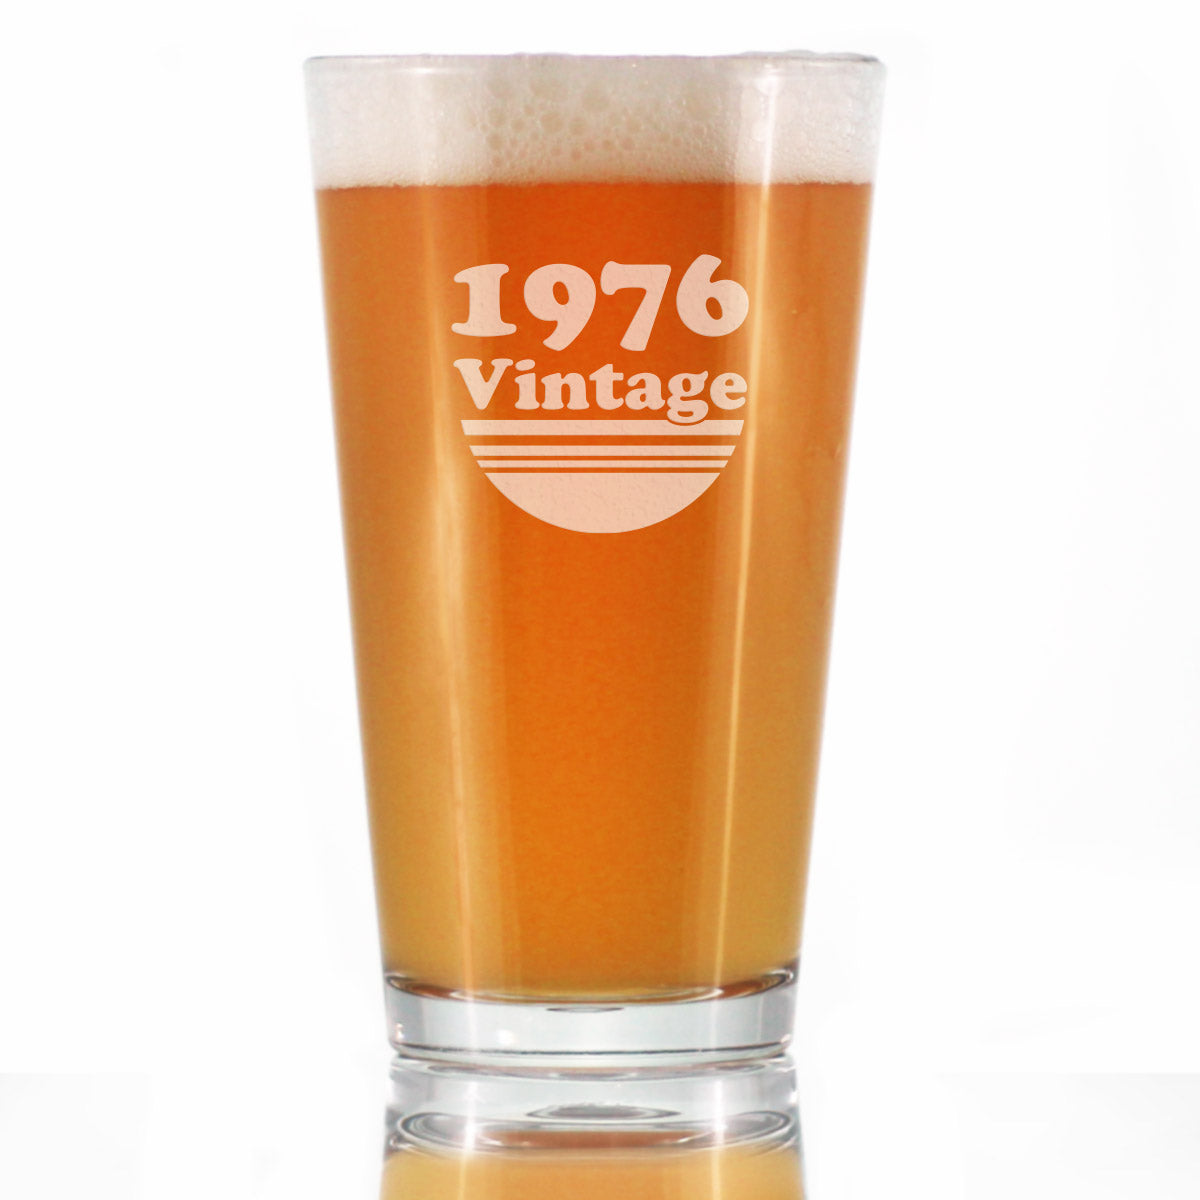 Vintage 1976 - Pint Glass for Beer - 48th Birthday Gifts for Men or Women Turning 48 - Fun Bday Party Decor - 16 oz